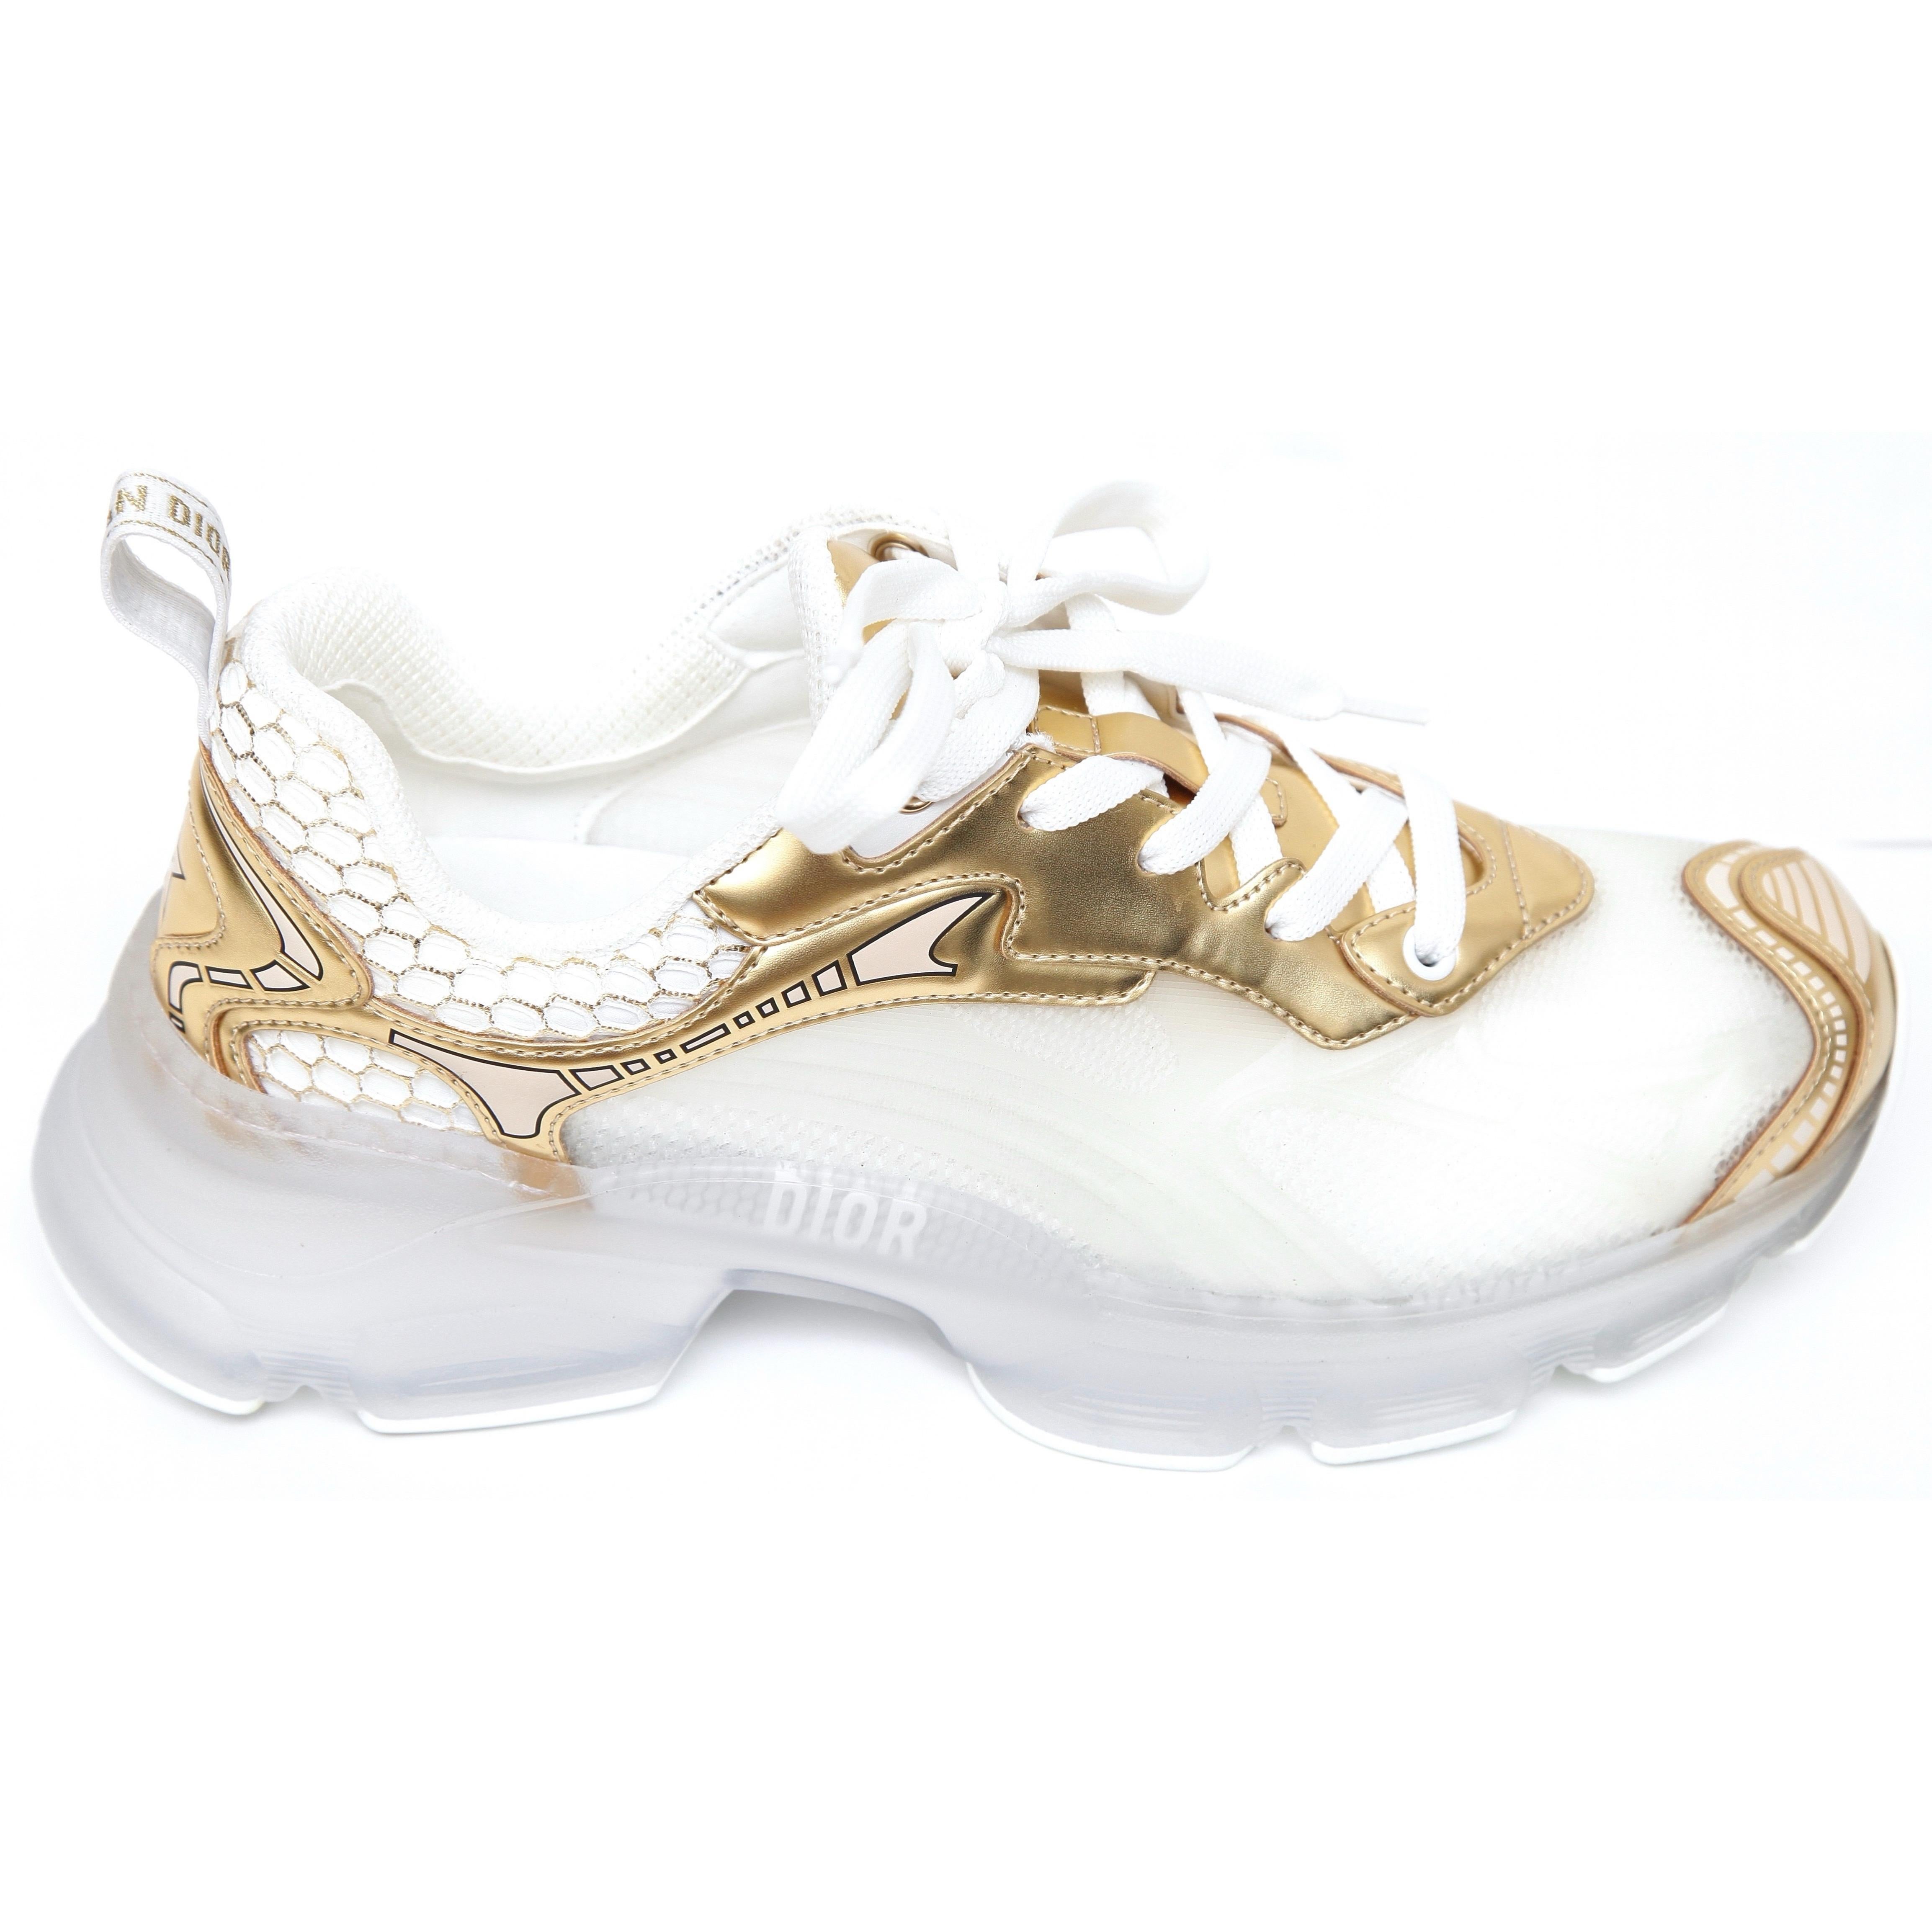 GUARANTEED AUTHENTIC CHRISTIAN DIOR VIBE WHITE GOLD-TONE SNEAKERS

Retail excluding sales taxes $1,190

Design:
- Vibe lace-up sneakers in white mesh and gold-tone technical fabric..
- Transparent rubber inserts.
- Signature at rear pull tag.
-